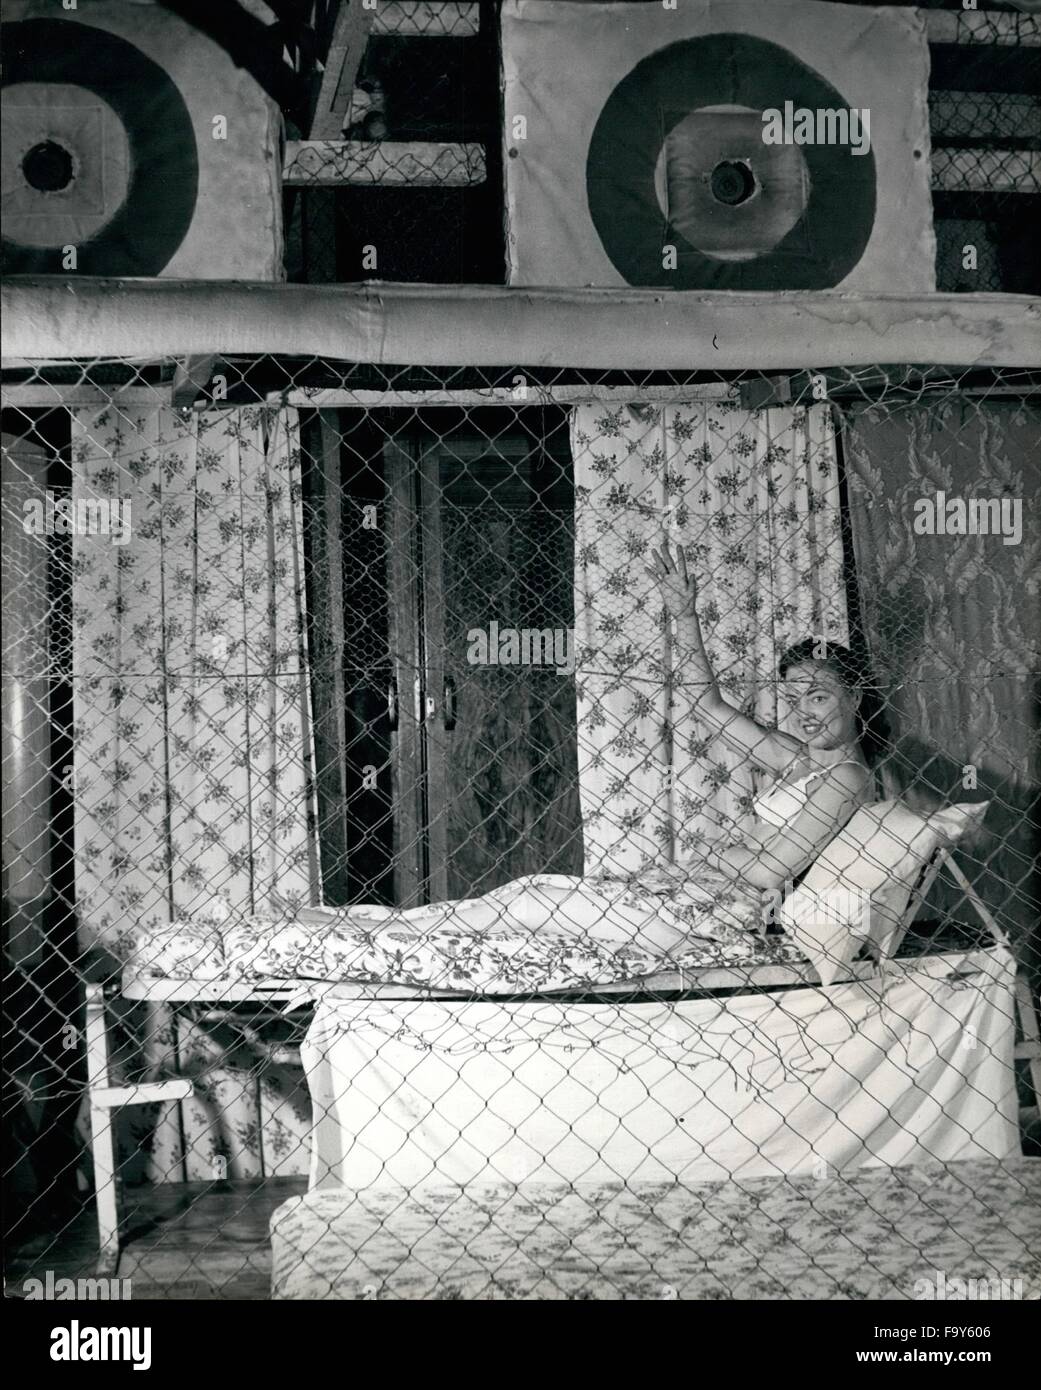 1968 - Maureen is in and out of bed all day: zazaiz ''Safely'' behind hor wiro, Maureon Sutton sits up in bed. She's ''safe'' only from the 'amunition' thrown at the targets above her. As soon as one hits the bull, an electric currents one rates the tiping machine and Maureen is hurled from bed, onto the waiting mattress. © Keystone Pictures USA/ZUMAPRESS.com/Alamy Live News Stock Photo